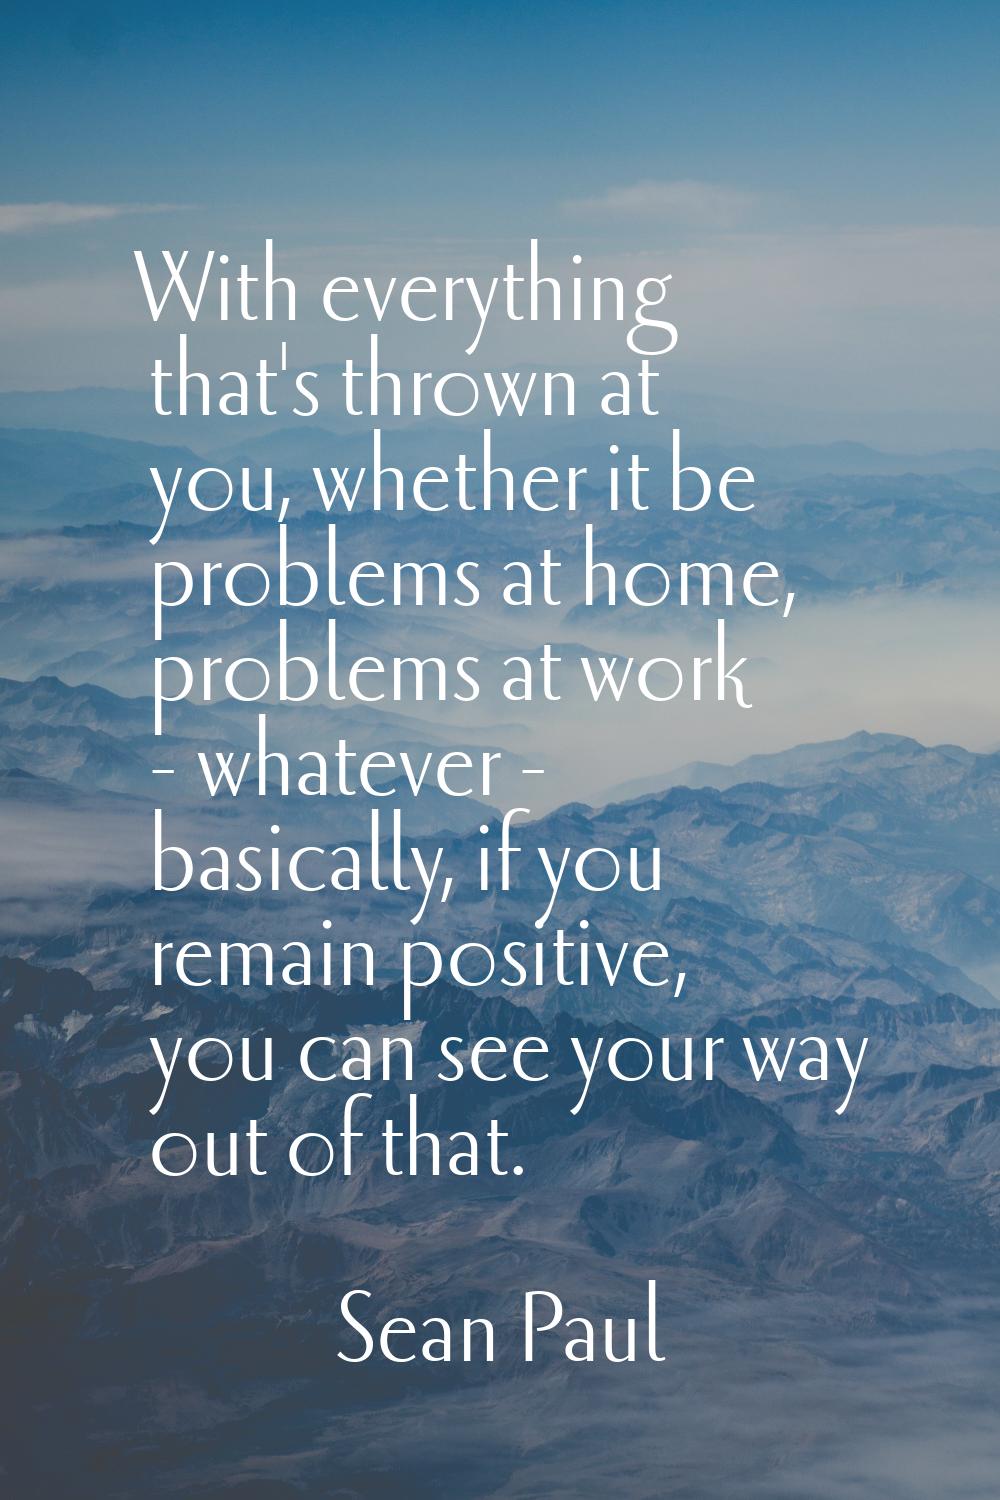 With everything that's thrown at you, whether it be problems at home, problems at work - whatever -